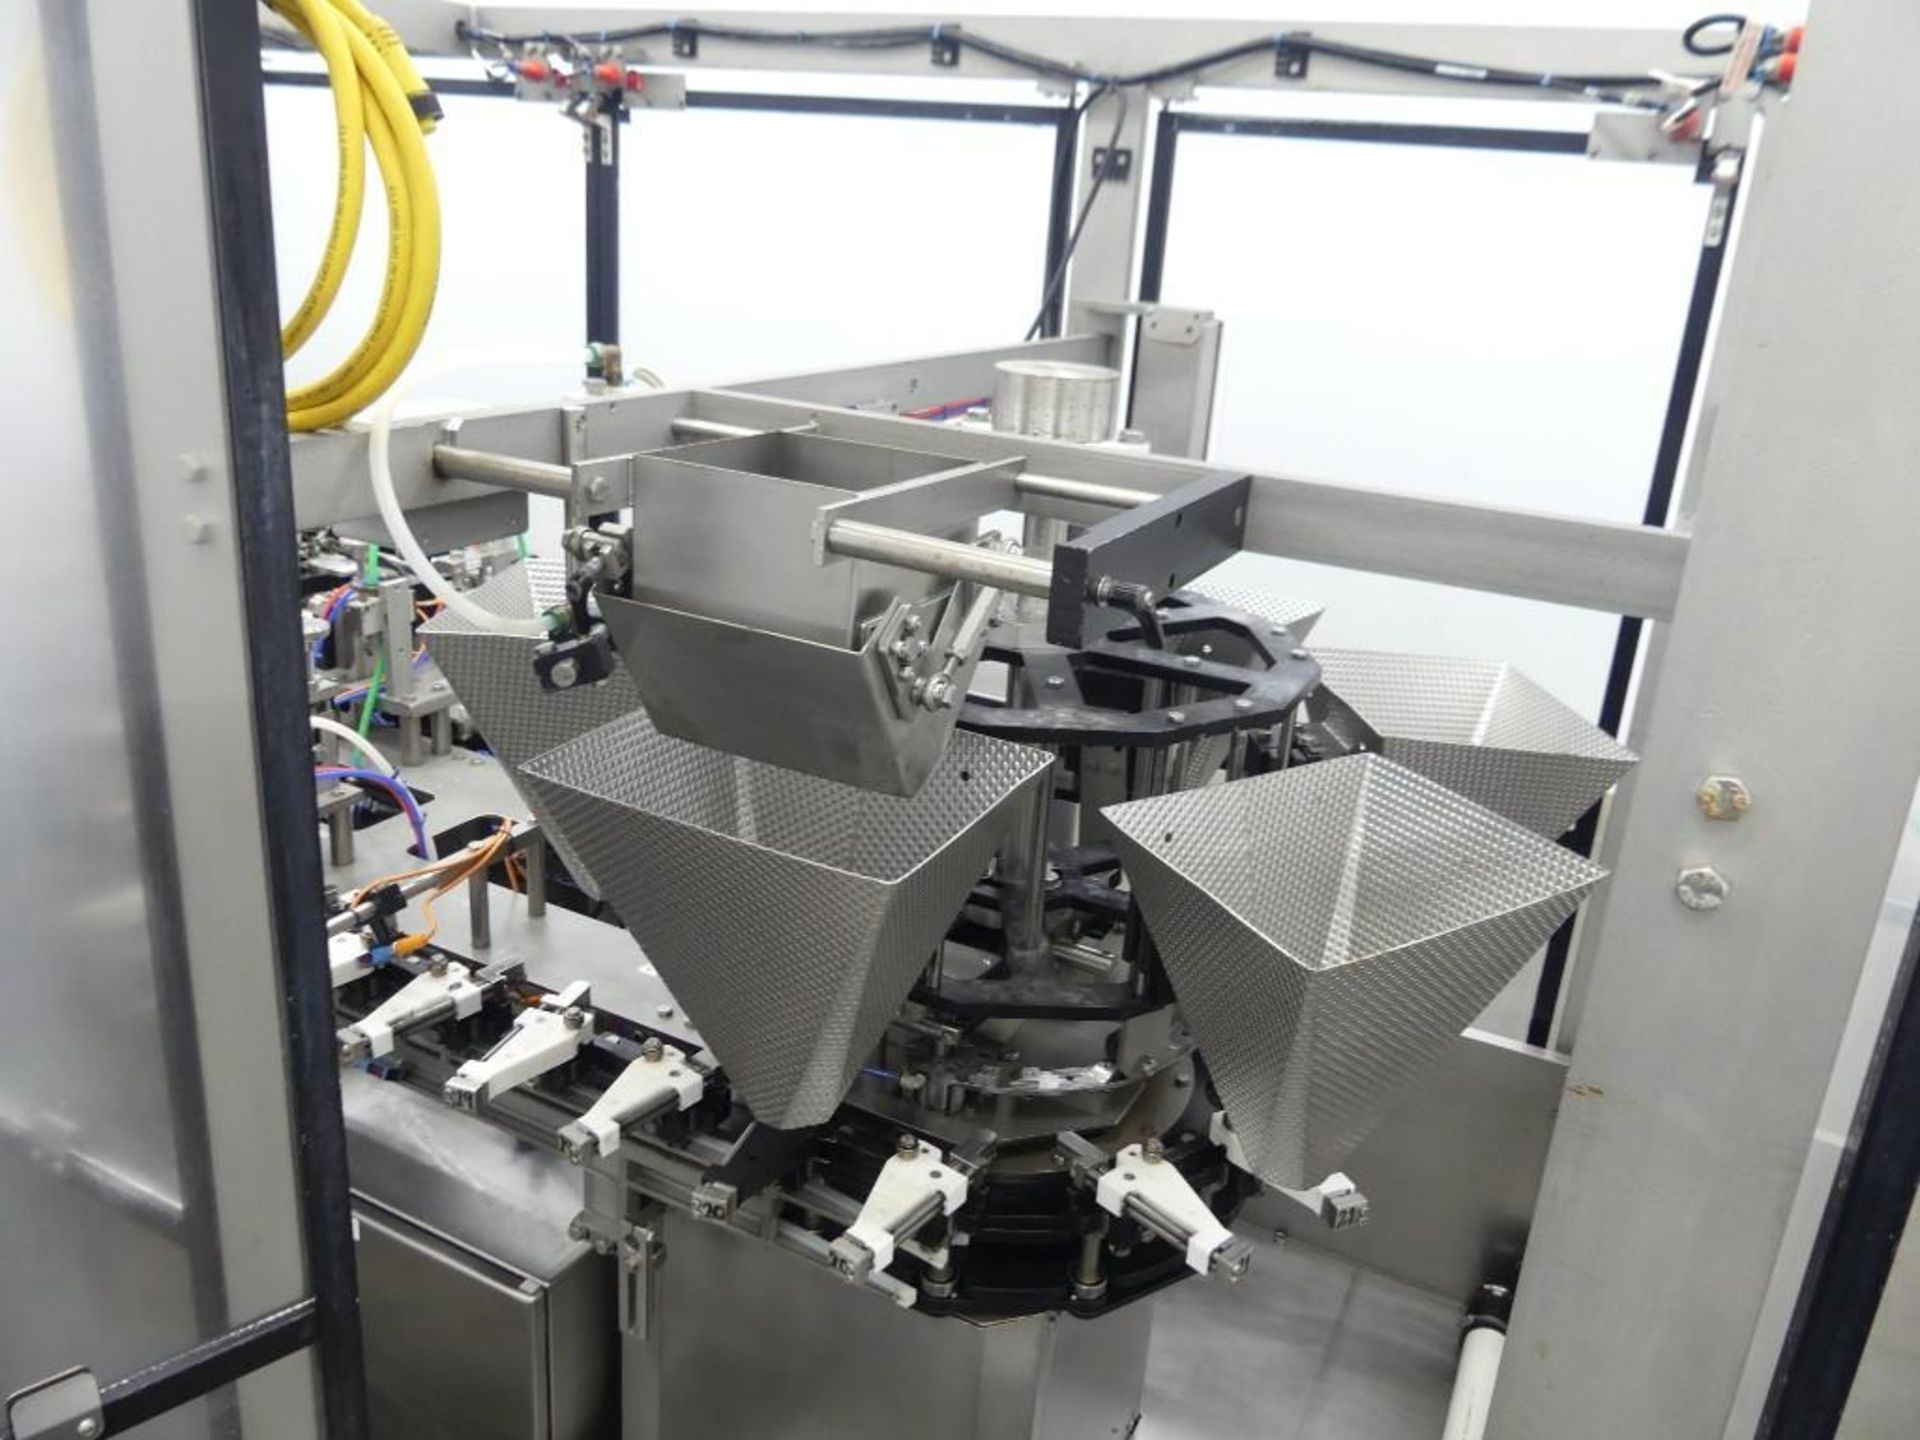 Massman HFFS-IM1000 Flexible Pouch Packaging System - Image 33 of 127